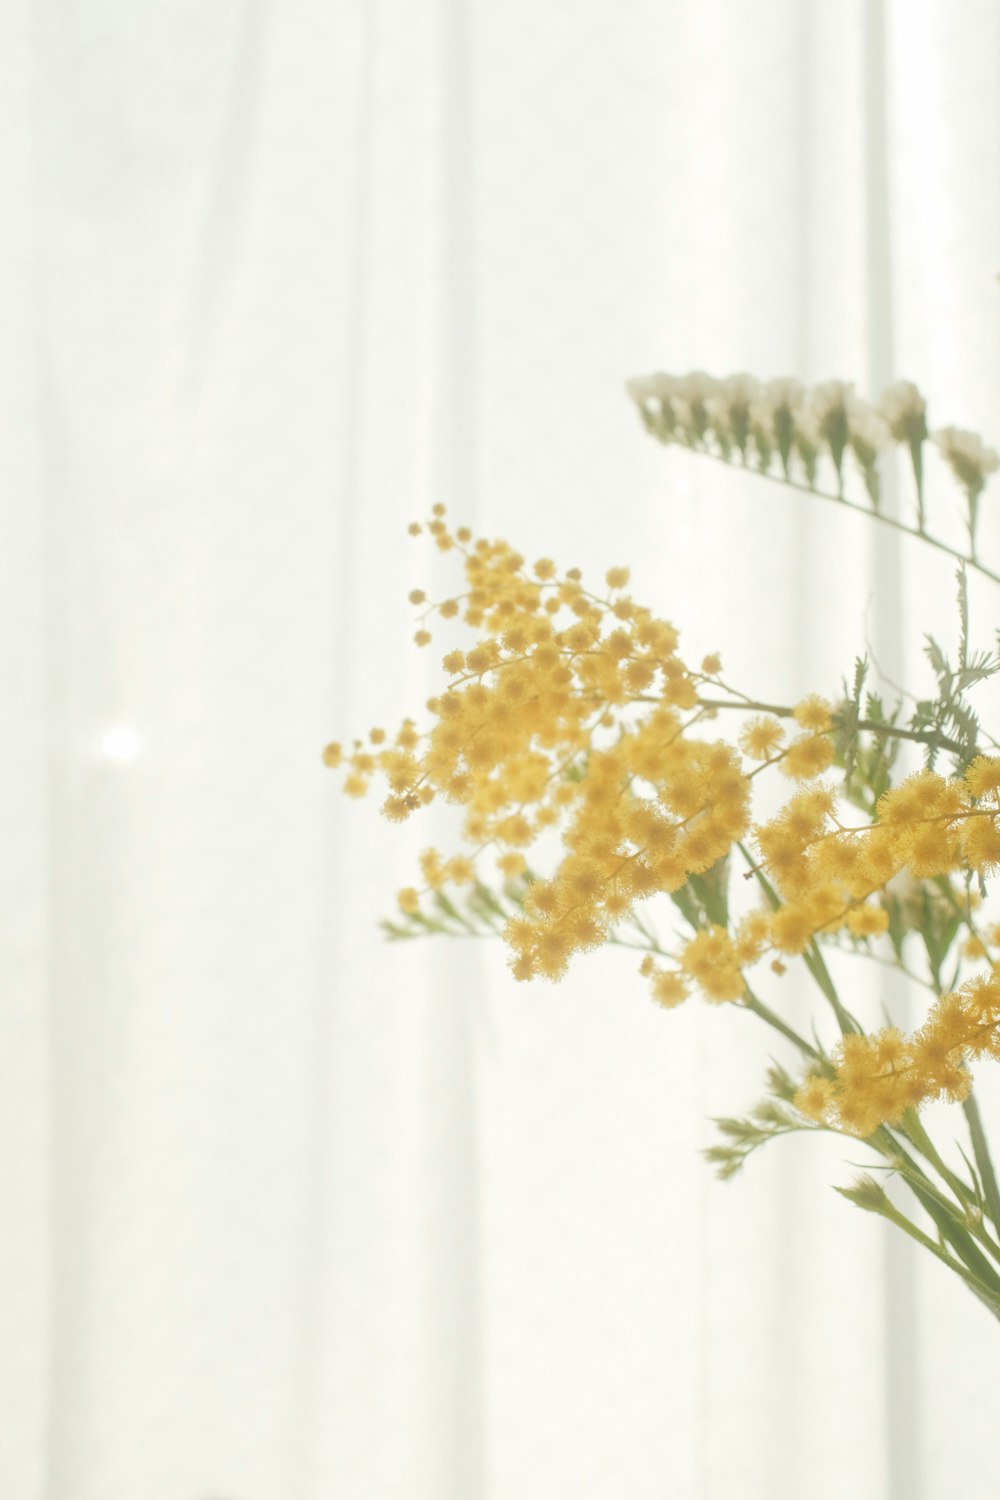 yellow and white flowers on white textile